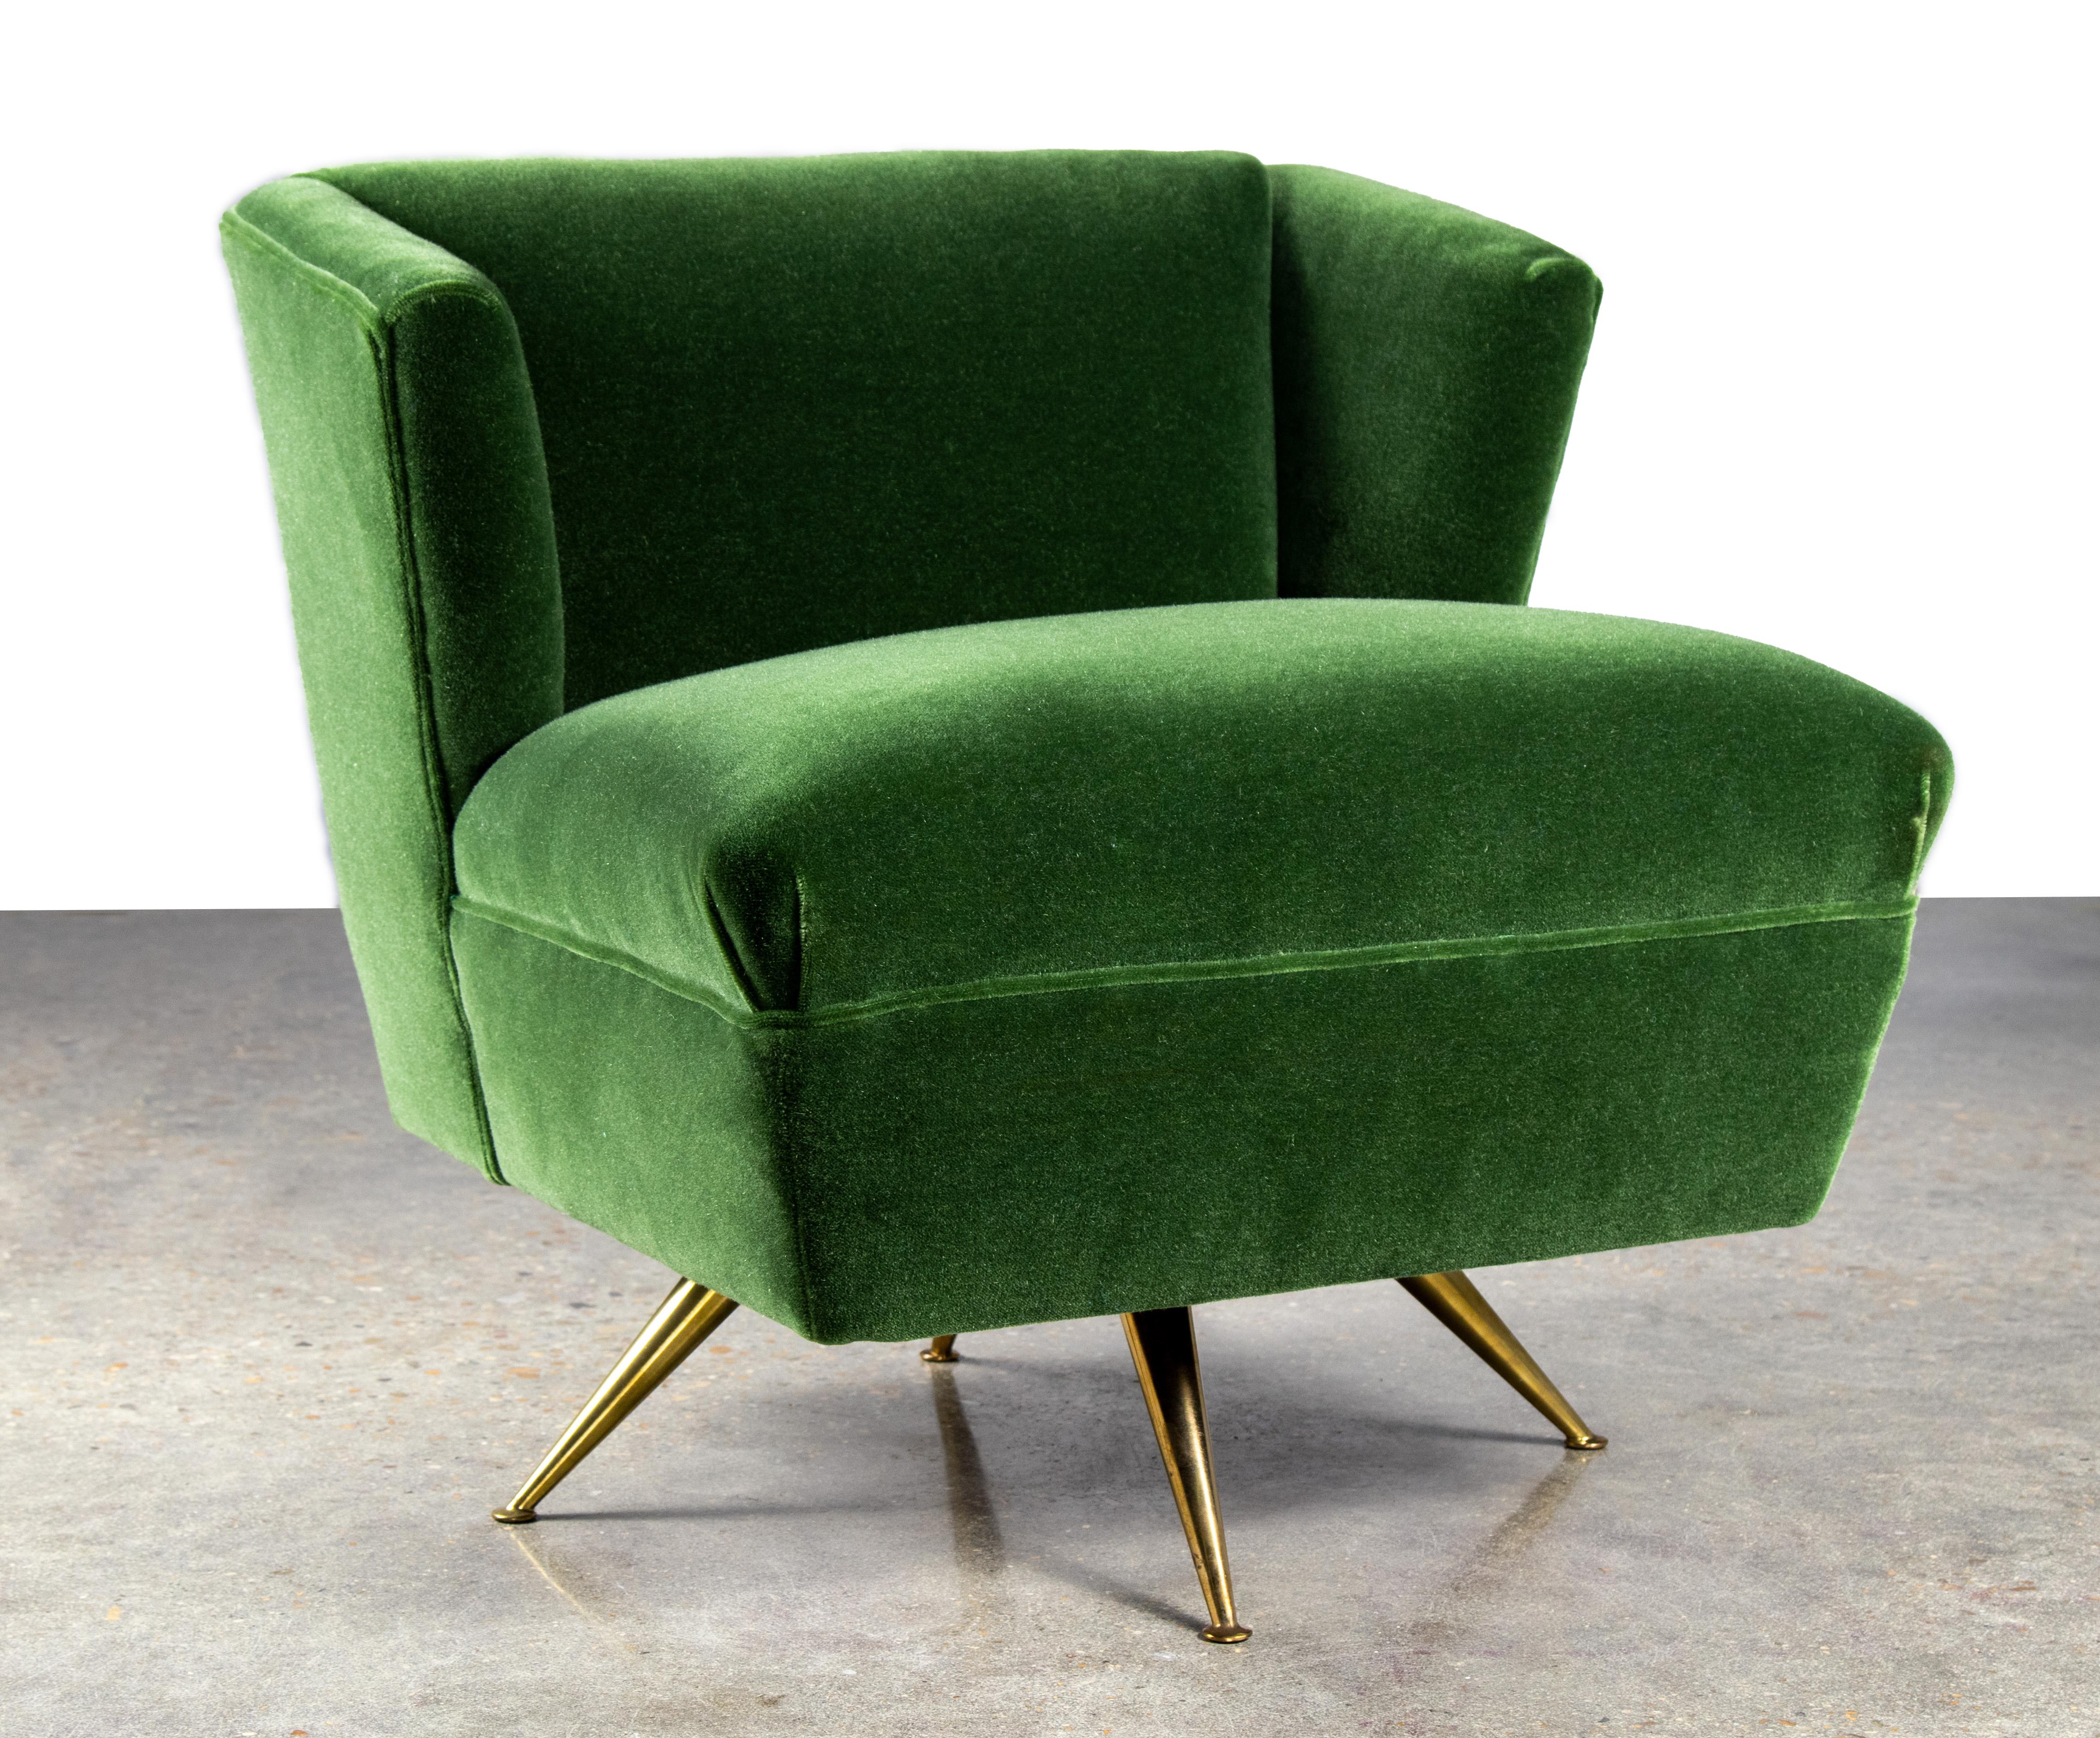 Mid-20th Century 1950s Henry P Glass Swivel Lounge Chair Green Mohair on Brass Legs JL Chase Co.